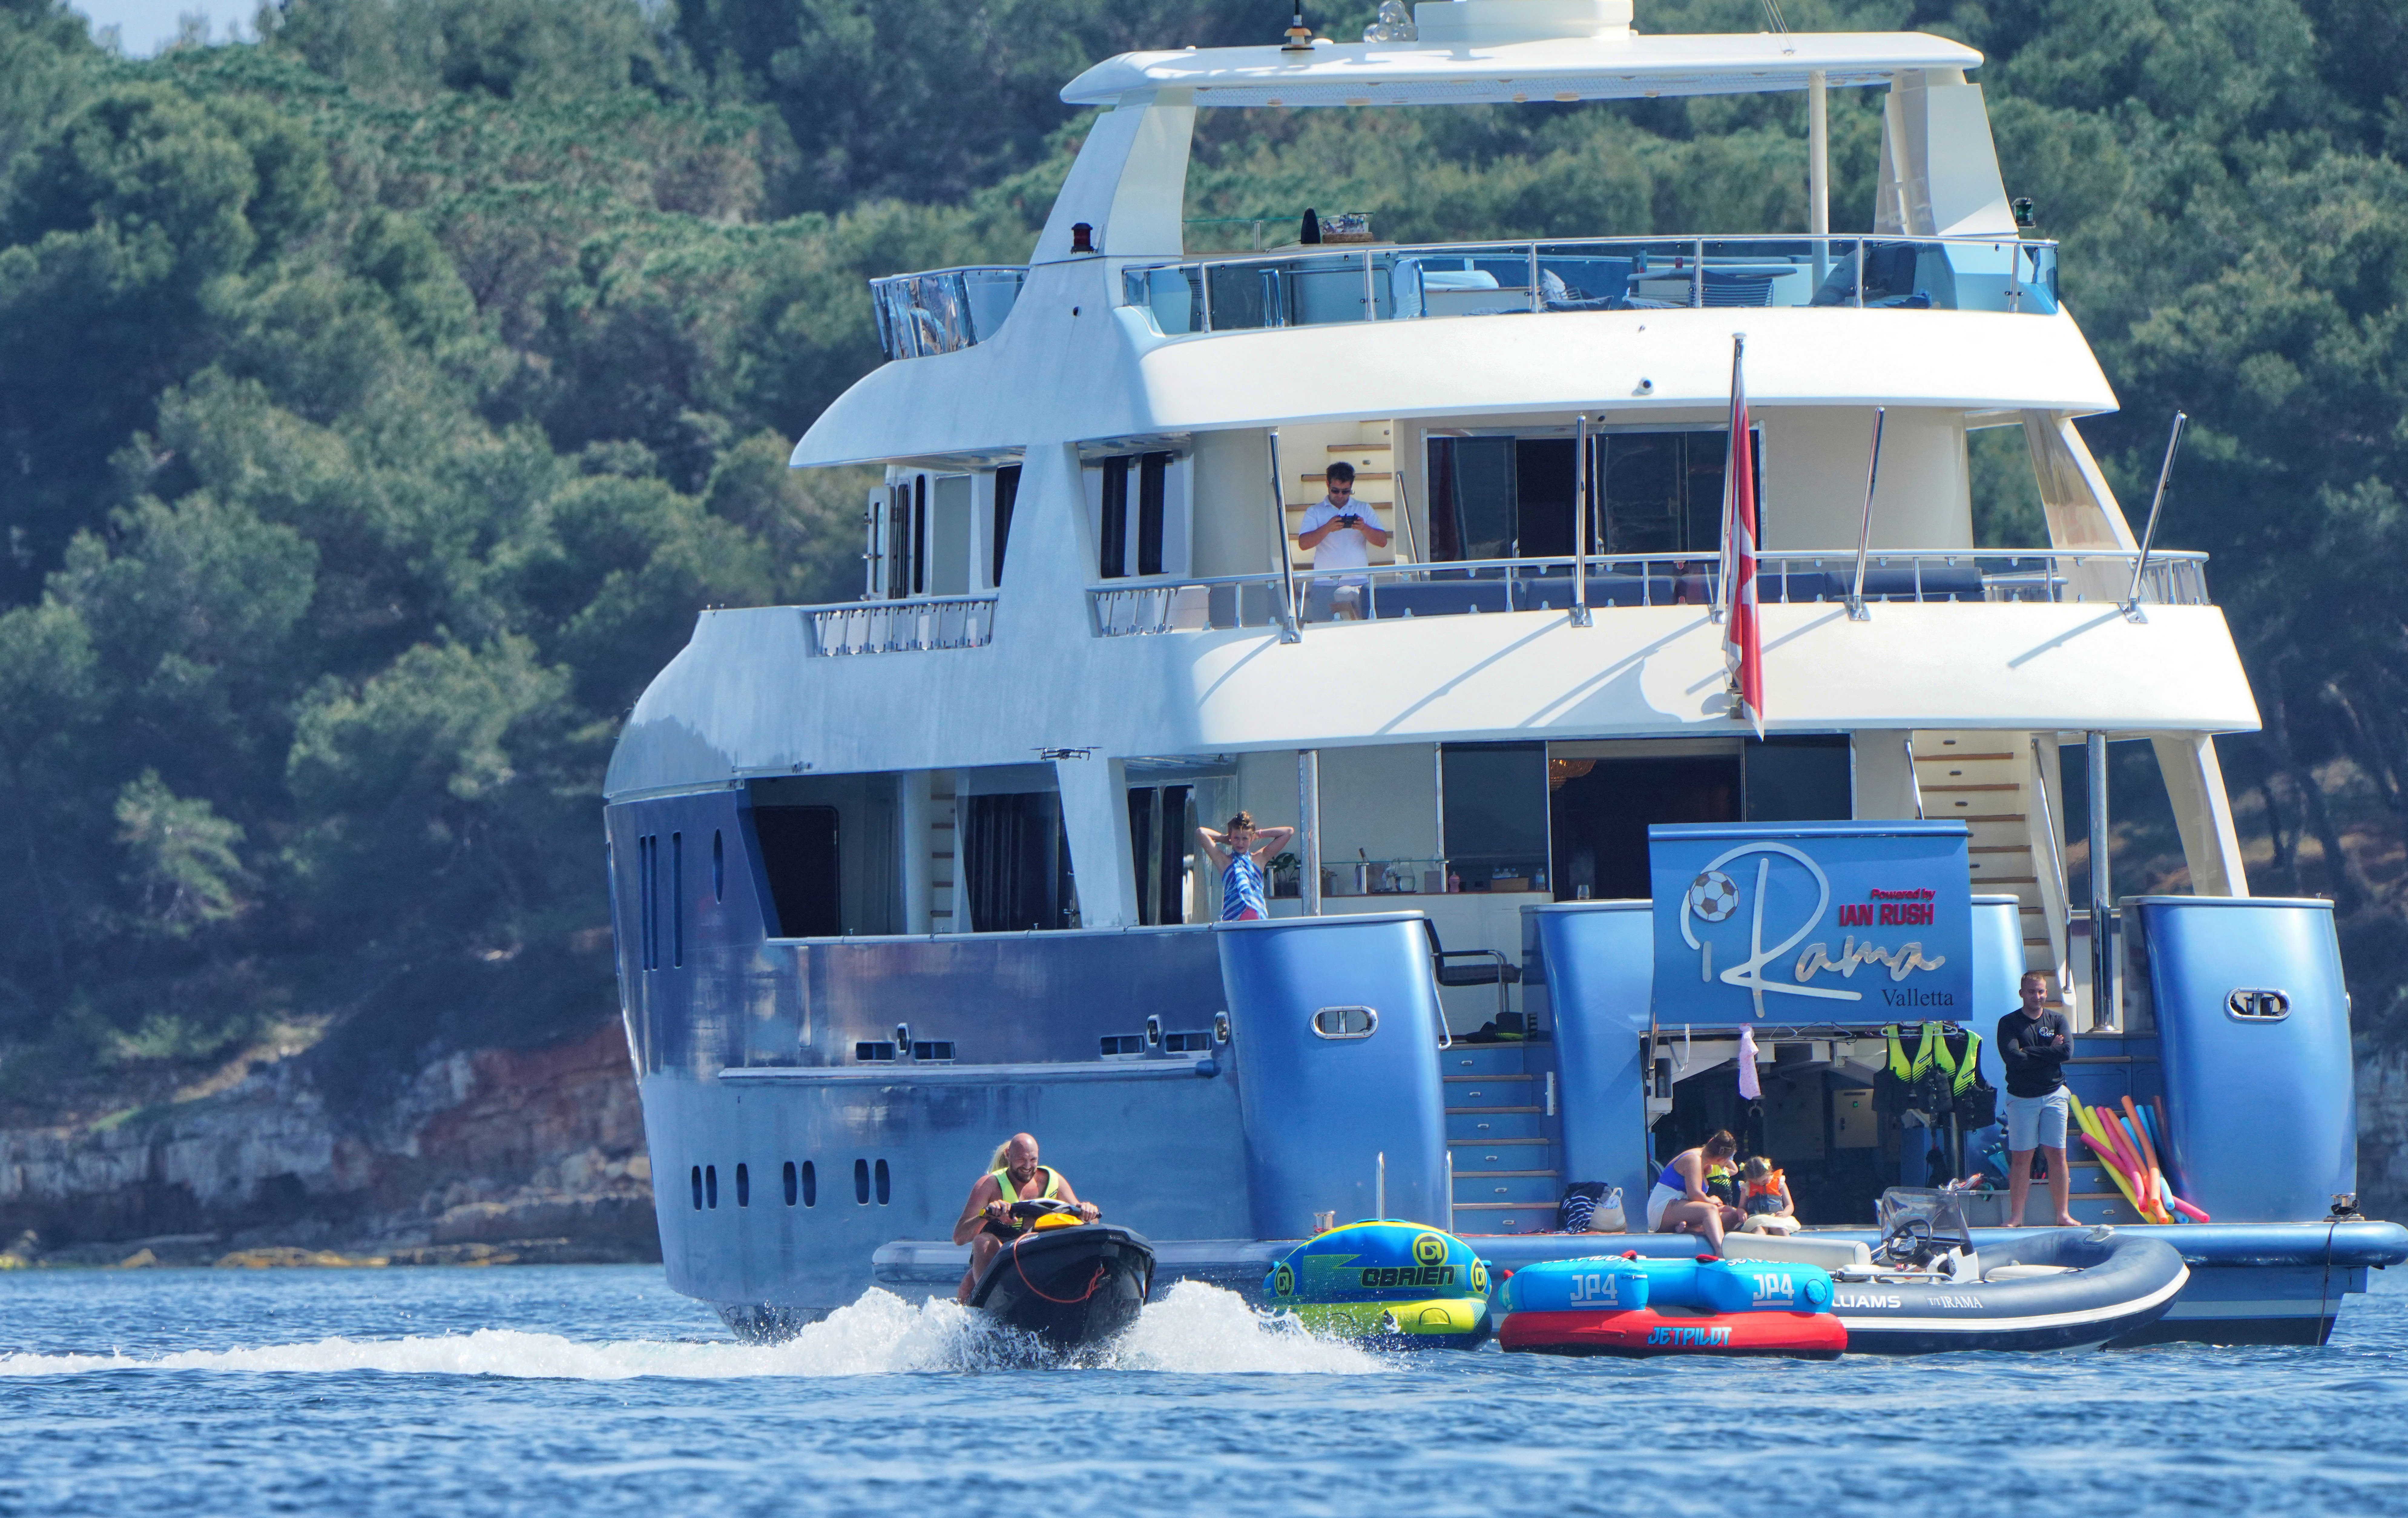 Tyson and Paris can be seen taking a jet-ski out, with the enormous yacht behind